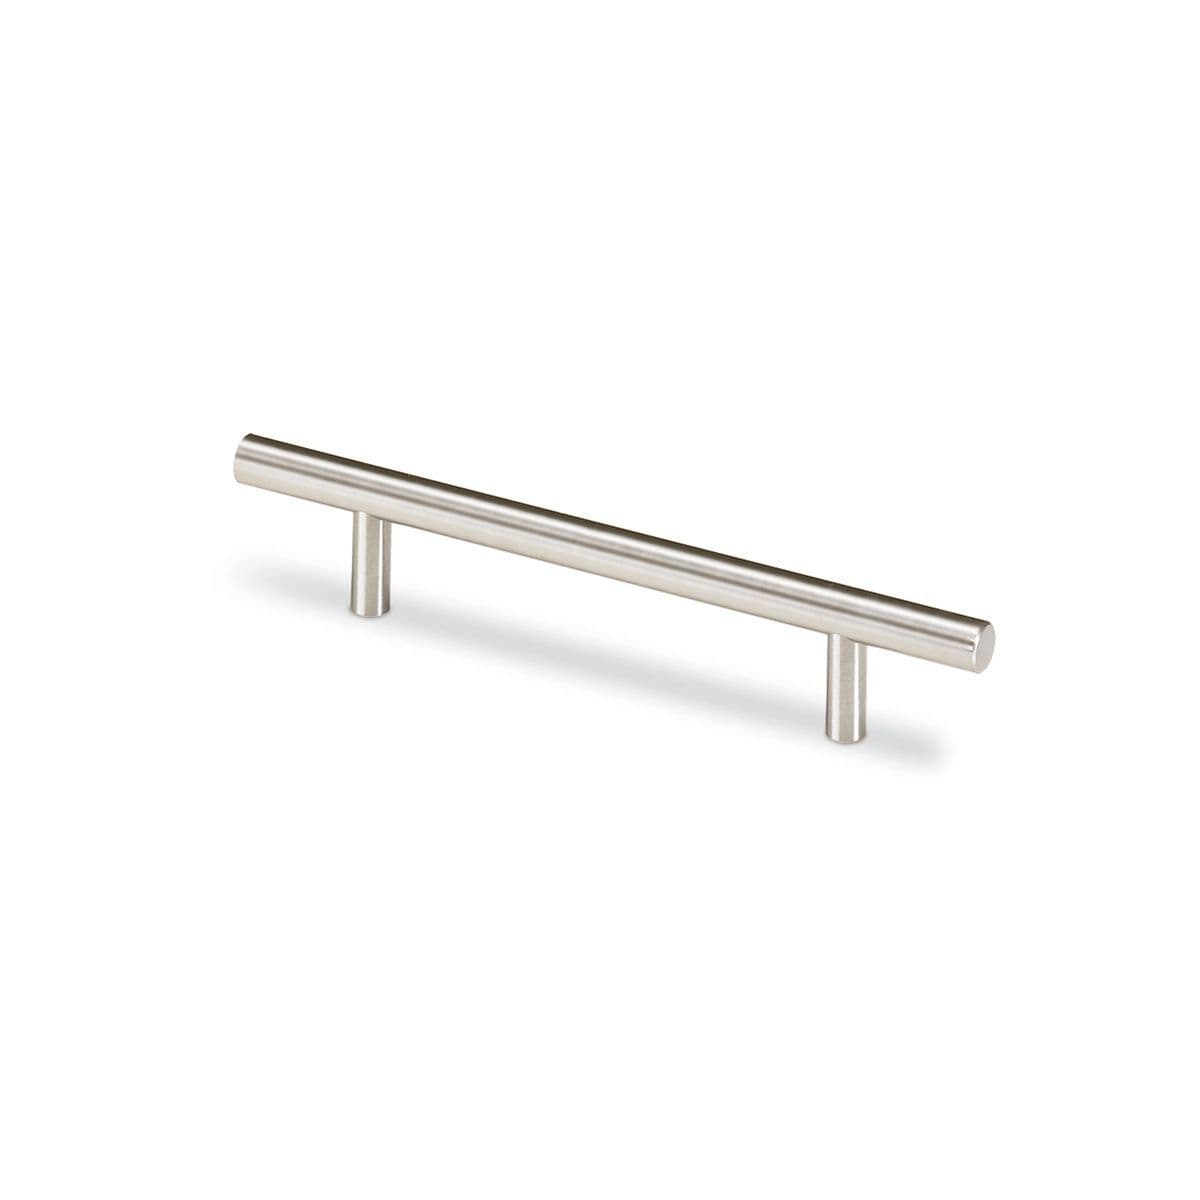 SALVIA 14mm dia T BAR Cupboard Handle  - 12 sizes - BRUSHED STAINLESS STEEL (HETTICH - New Modern)